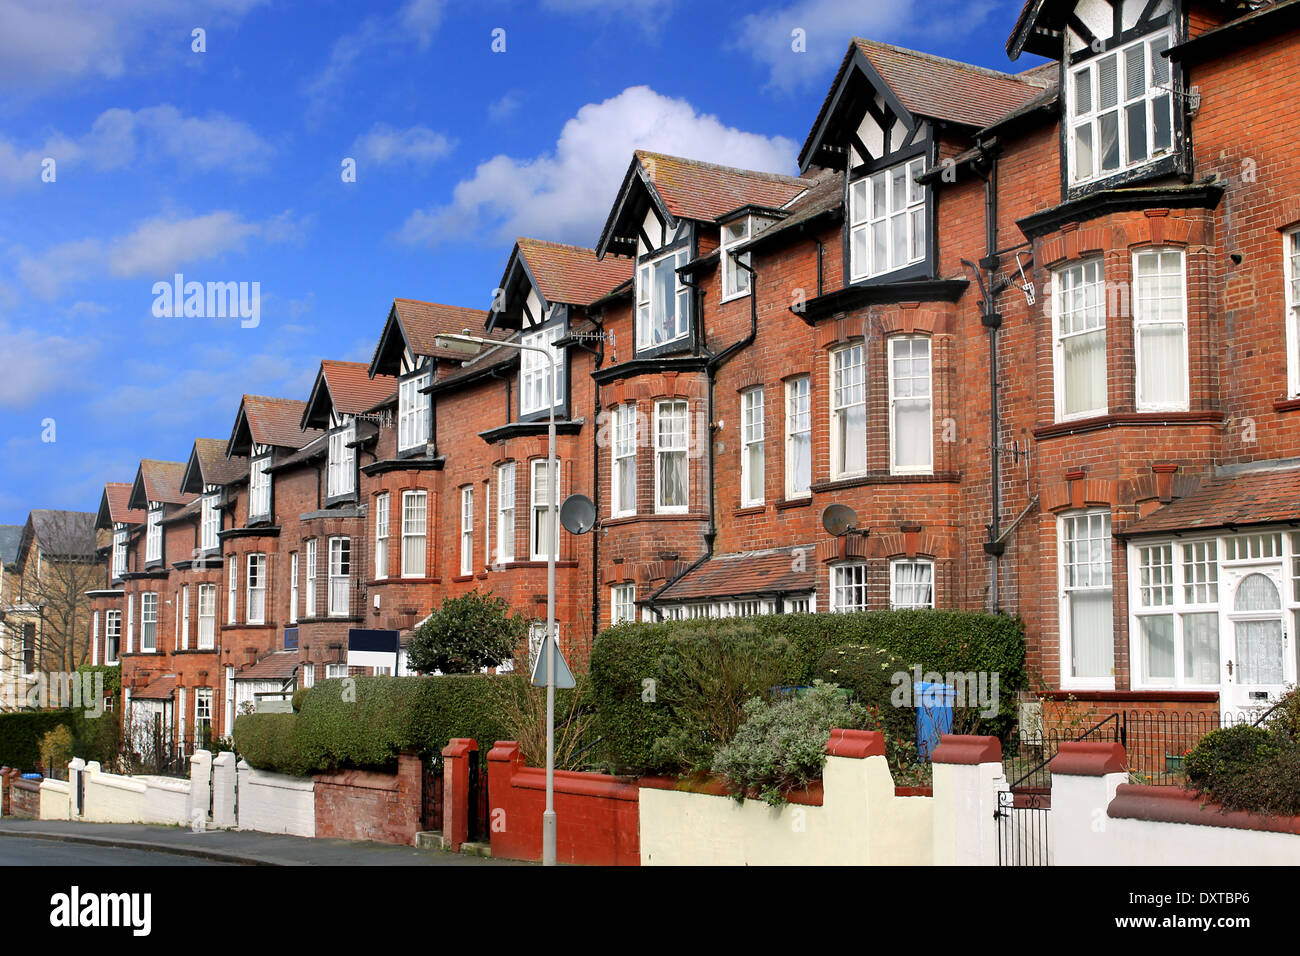 Row of old terraced houses on a street, Scarborough, England. Stock Photo